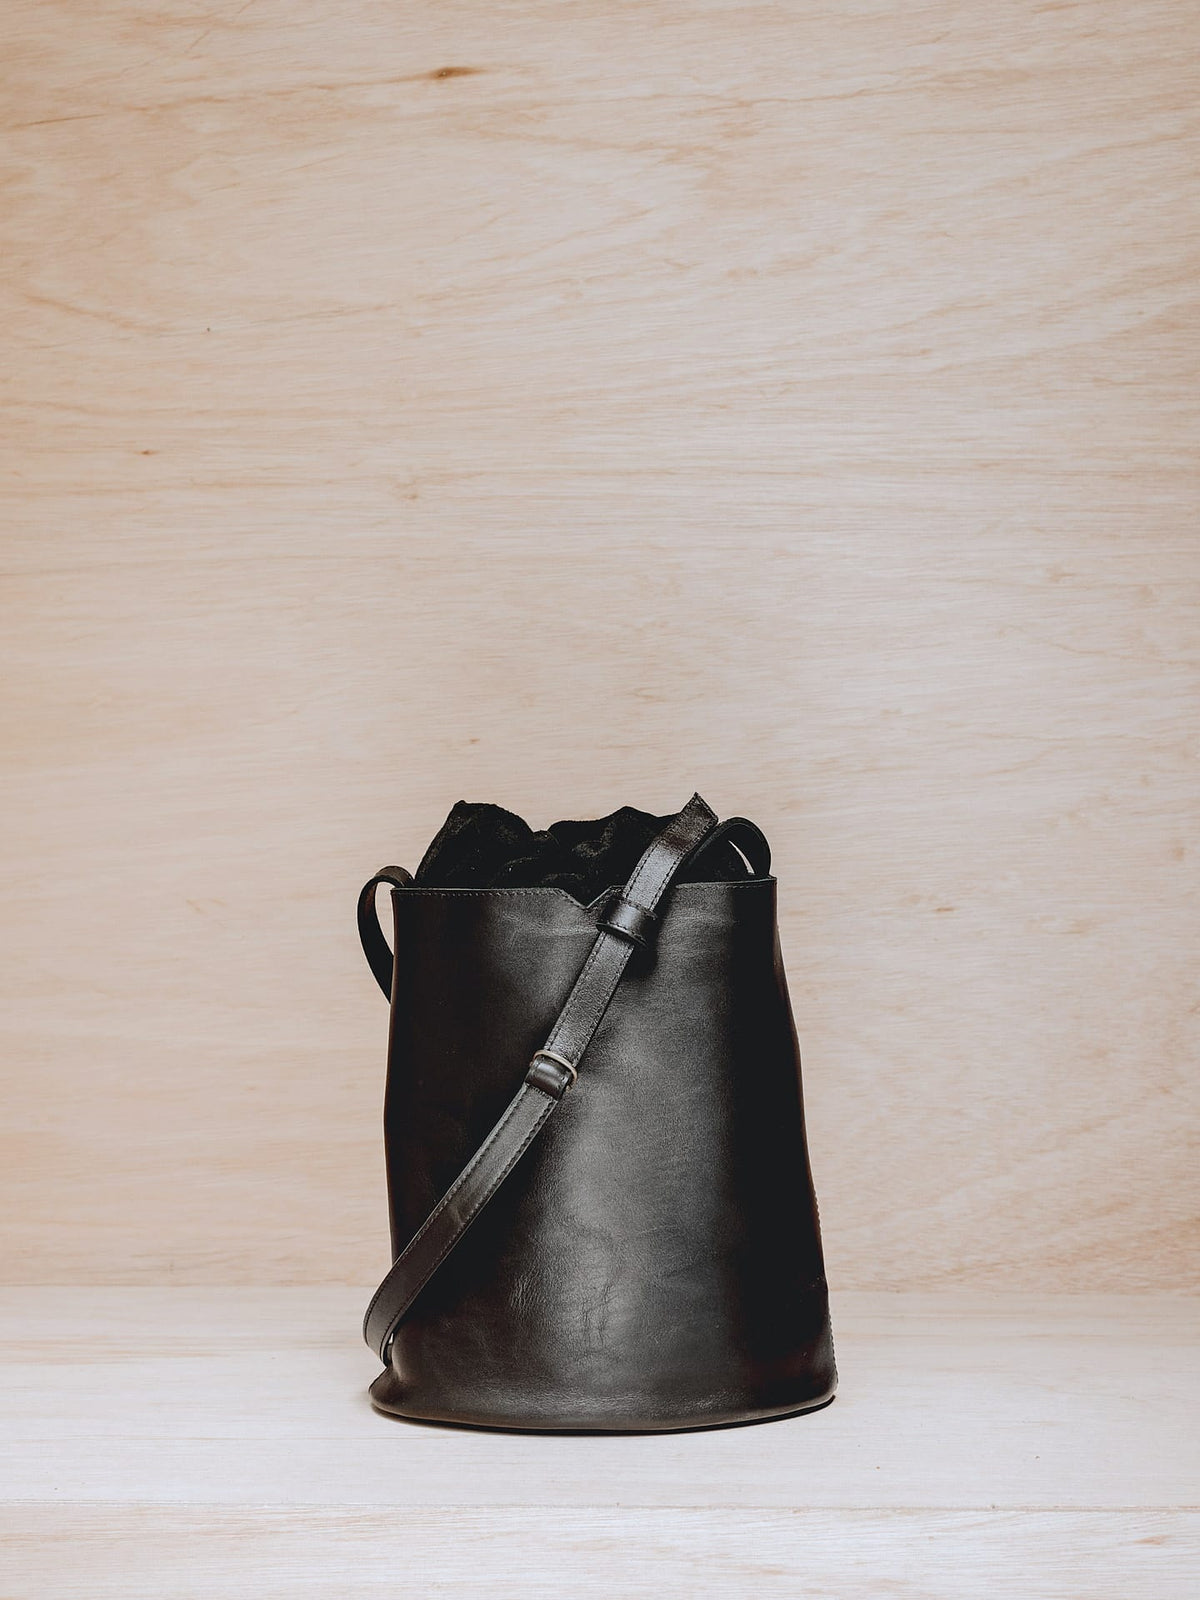 A black Lets Dance bucket bag sitting on top of a wooden table, made by Kohl &amp; Co.